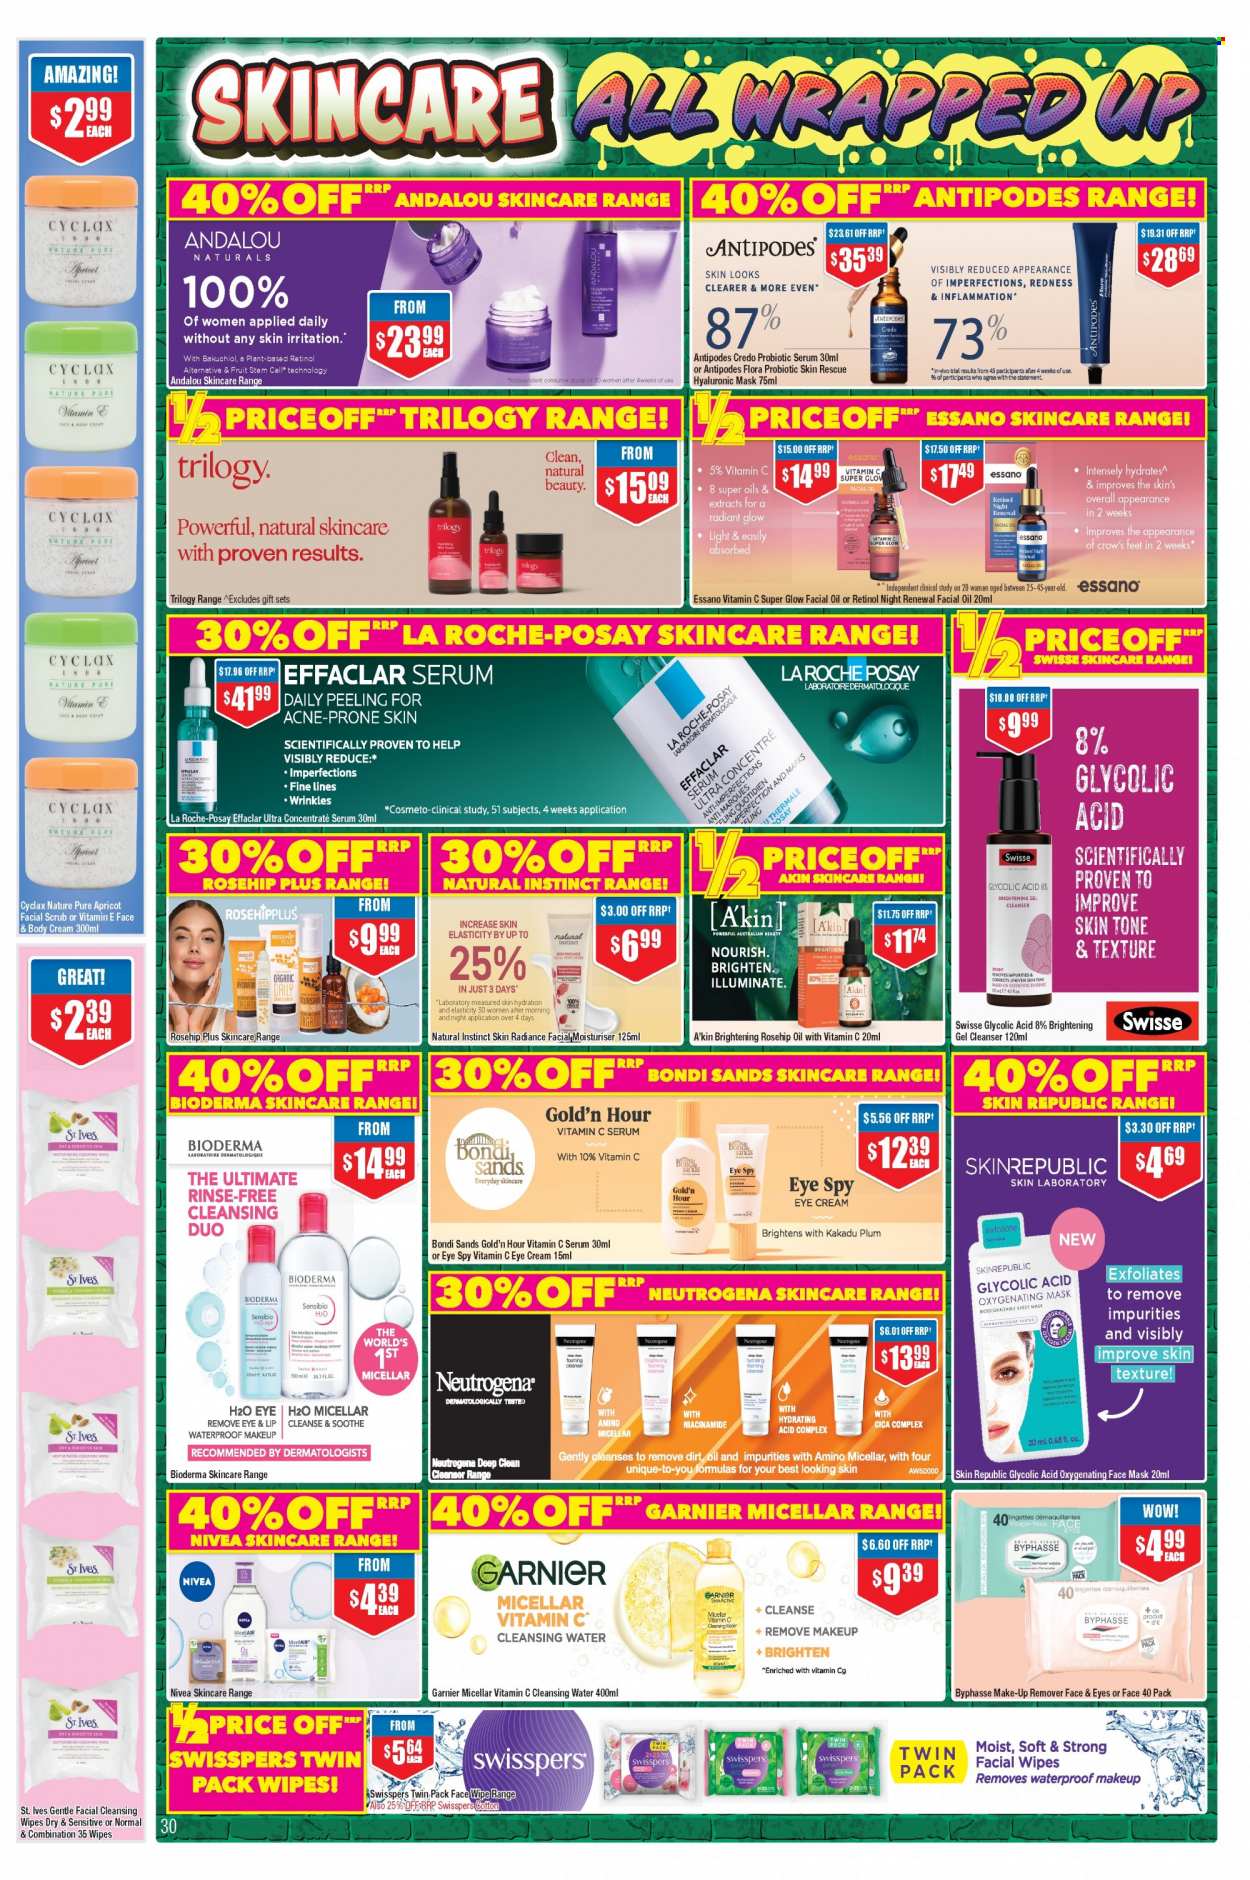 thumbnail - Chemist Warehouse Catalogue - 28 Nov 2022 - 11 Dec 2022 - Sales products - cleansing wipes, wipes, Nivea, Ace, Swisse, cleanser, Garnier, La Roche-Posay, micellar water, Neutrogena, serum, face mask, eye cream, Bondi Sands, Niacinamide, rosehip oil, facial oil, Essano, makeup remover. Page 30.